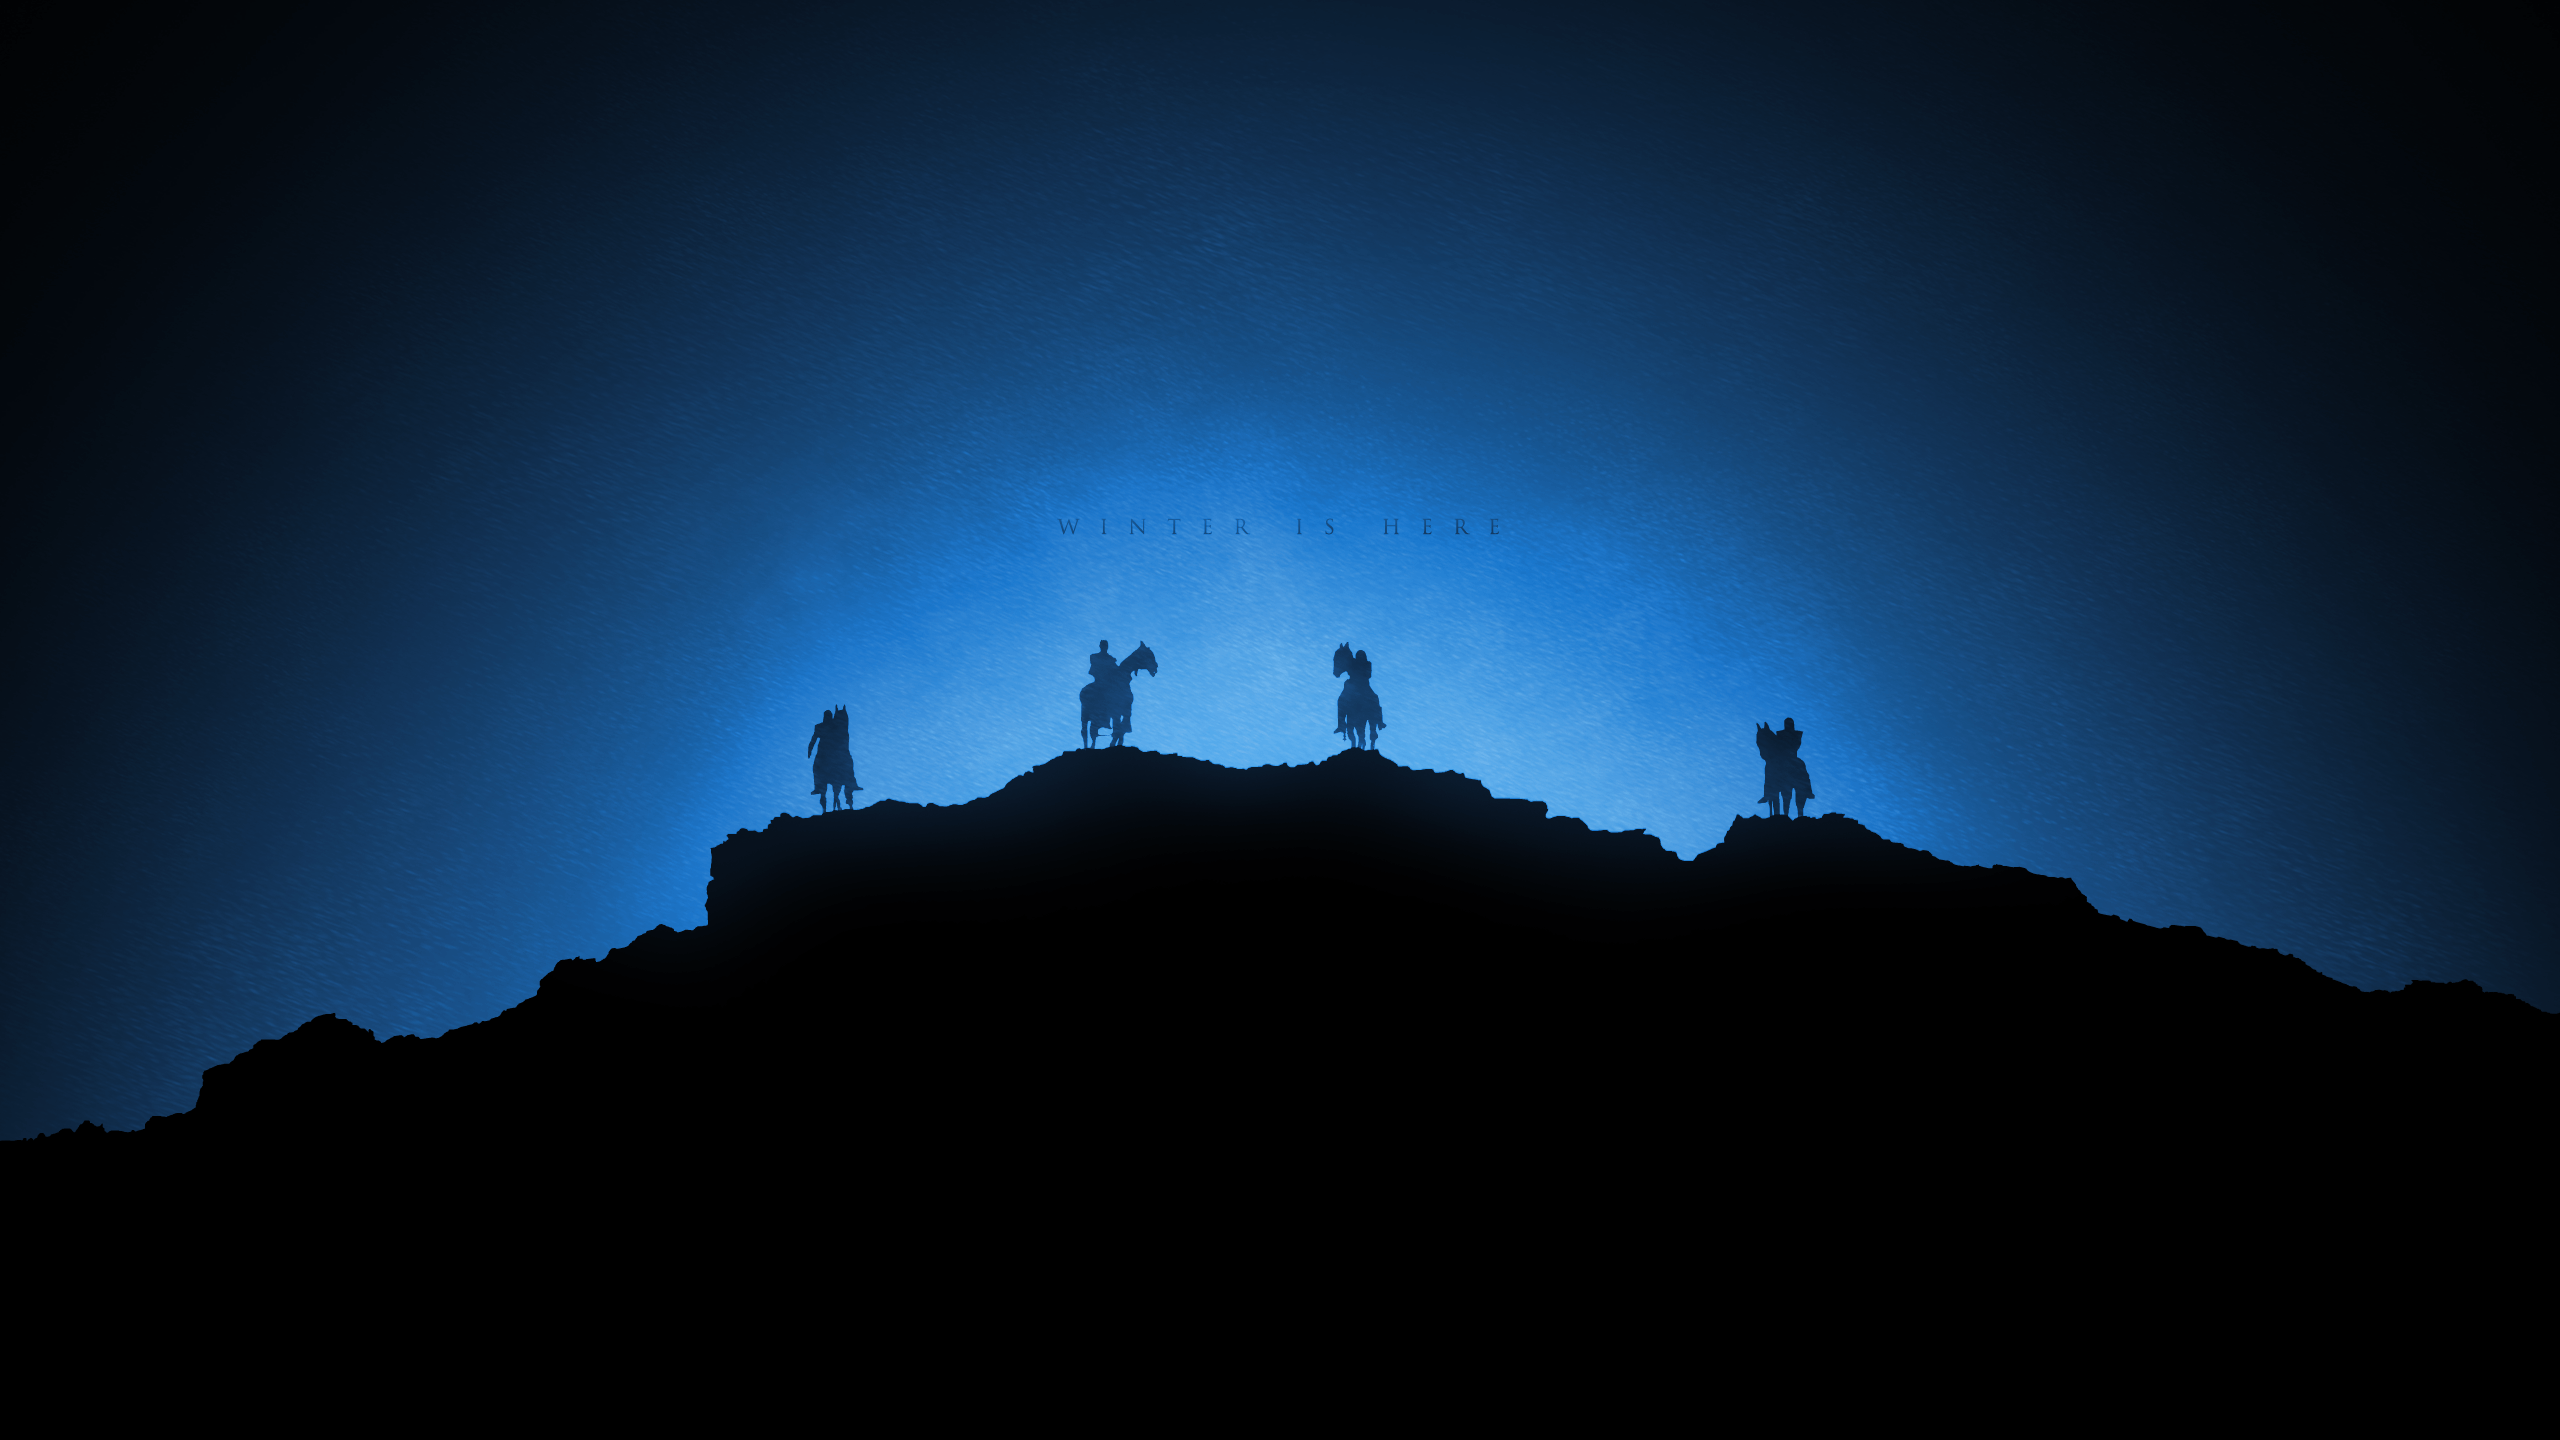 EVERYTHING I made this White Walker wallpaper based on that awesome